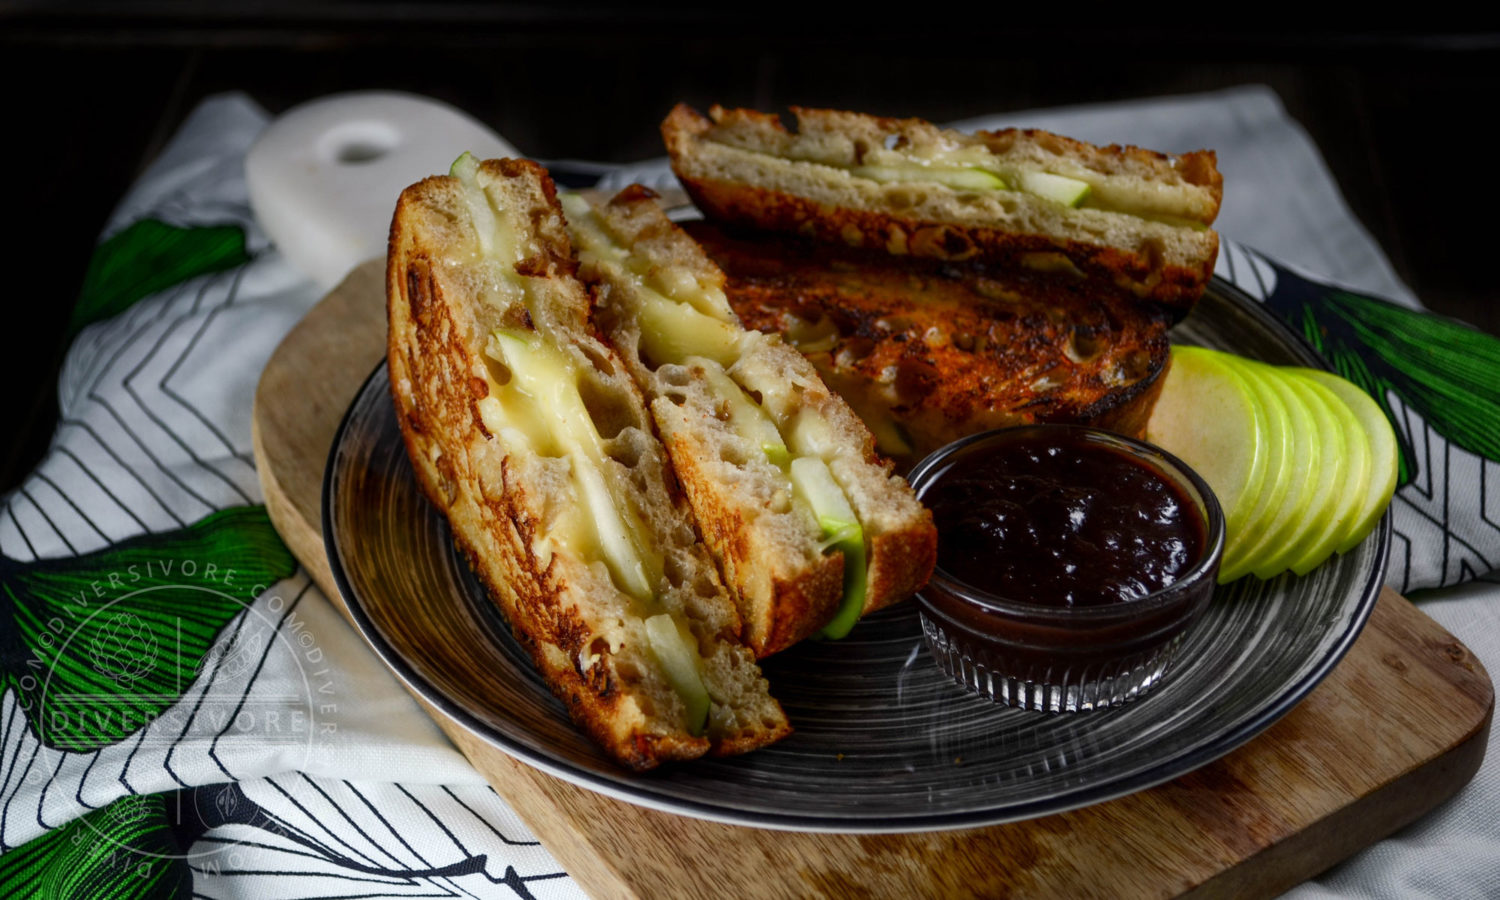 Granny Smith apple grilled cheese sandwich with aged cheddar and plumcot-blueberry ketchup - Diversivore.com